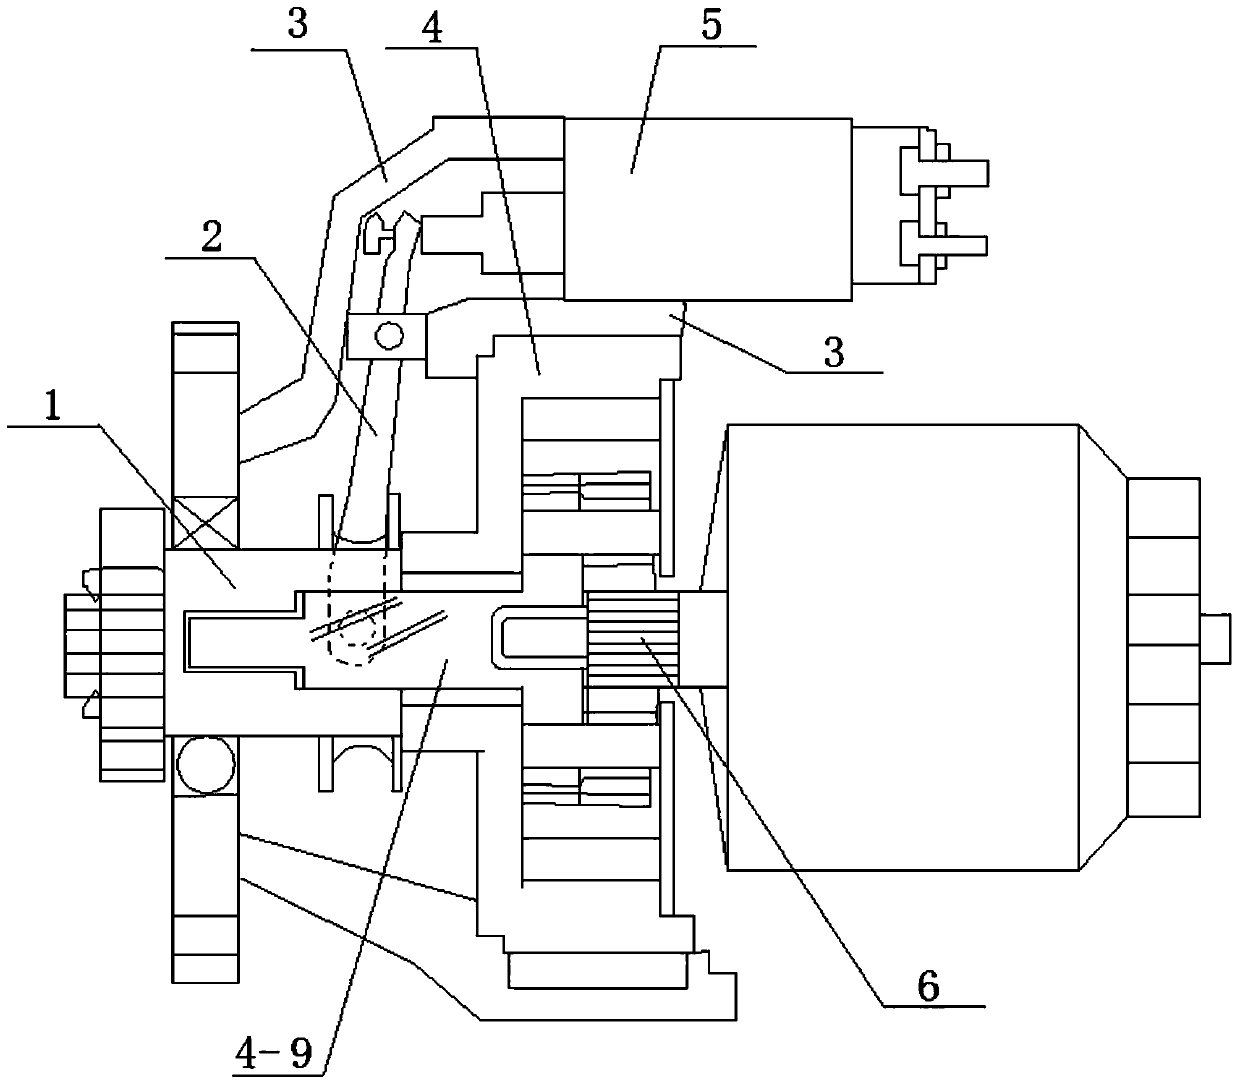 A compact internal combustion engine starter with external electromagnetic switch